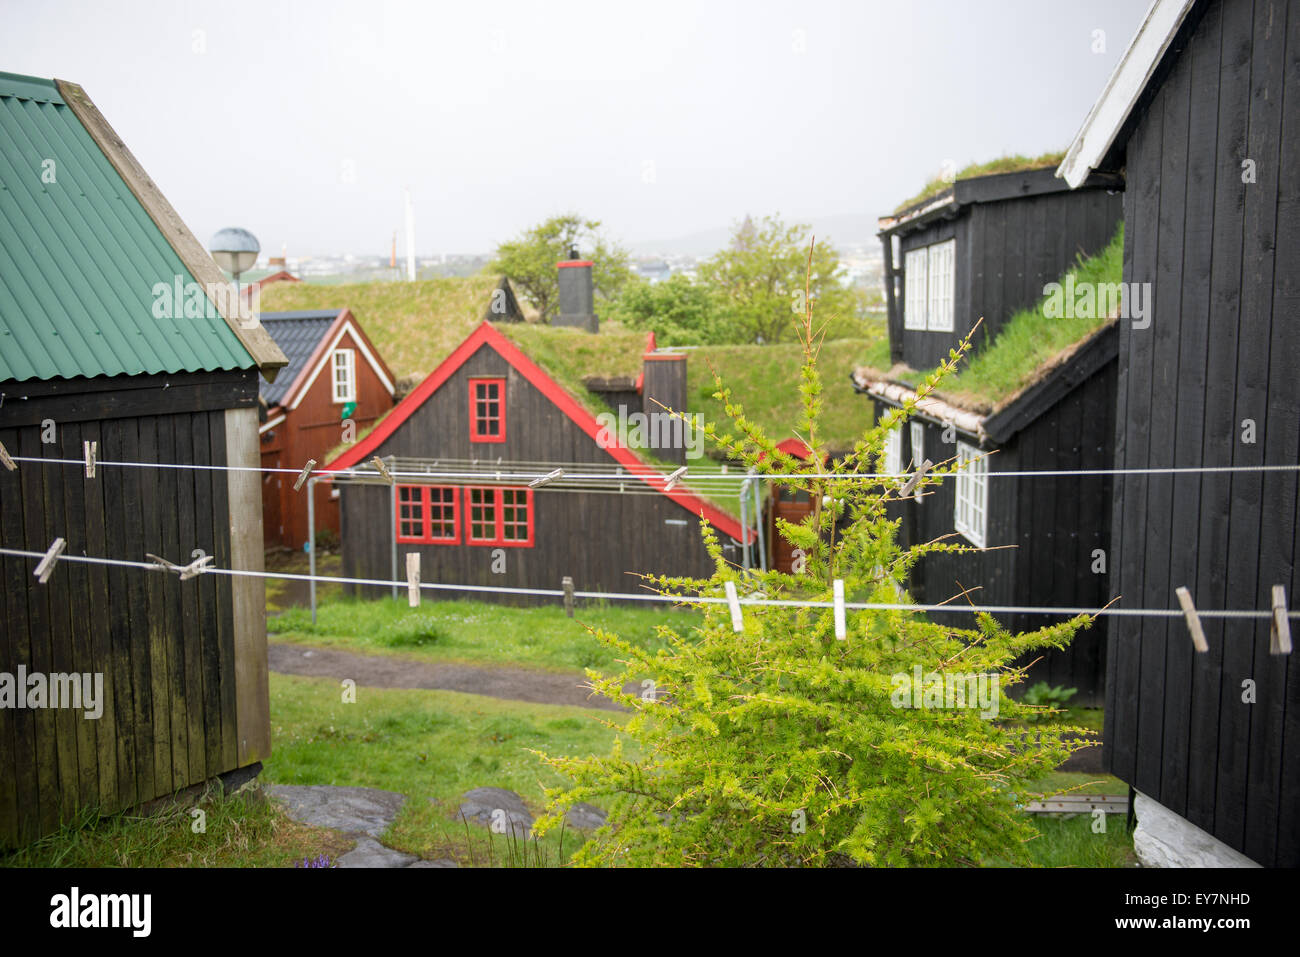 The old town of Torshavn with red and black old wooden houses Stock Photo